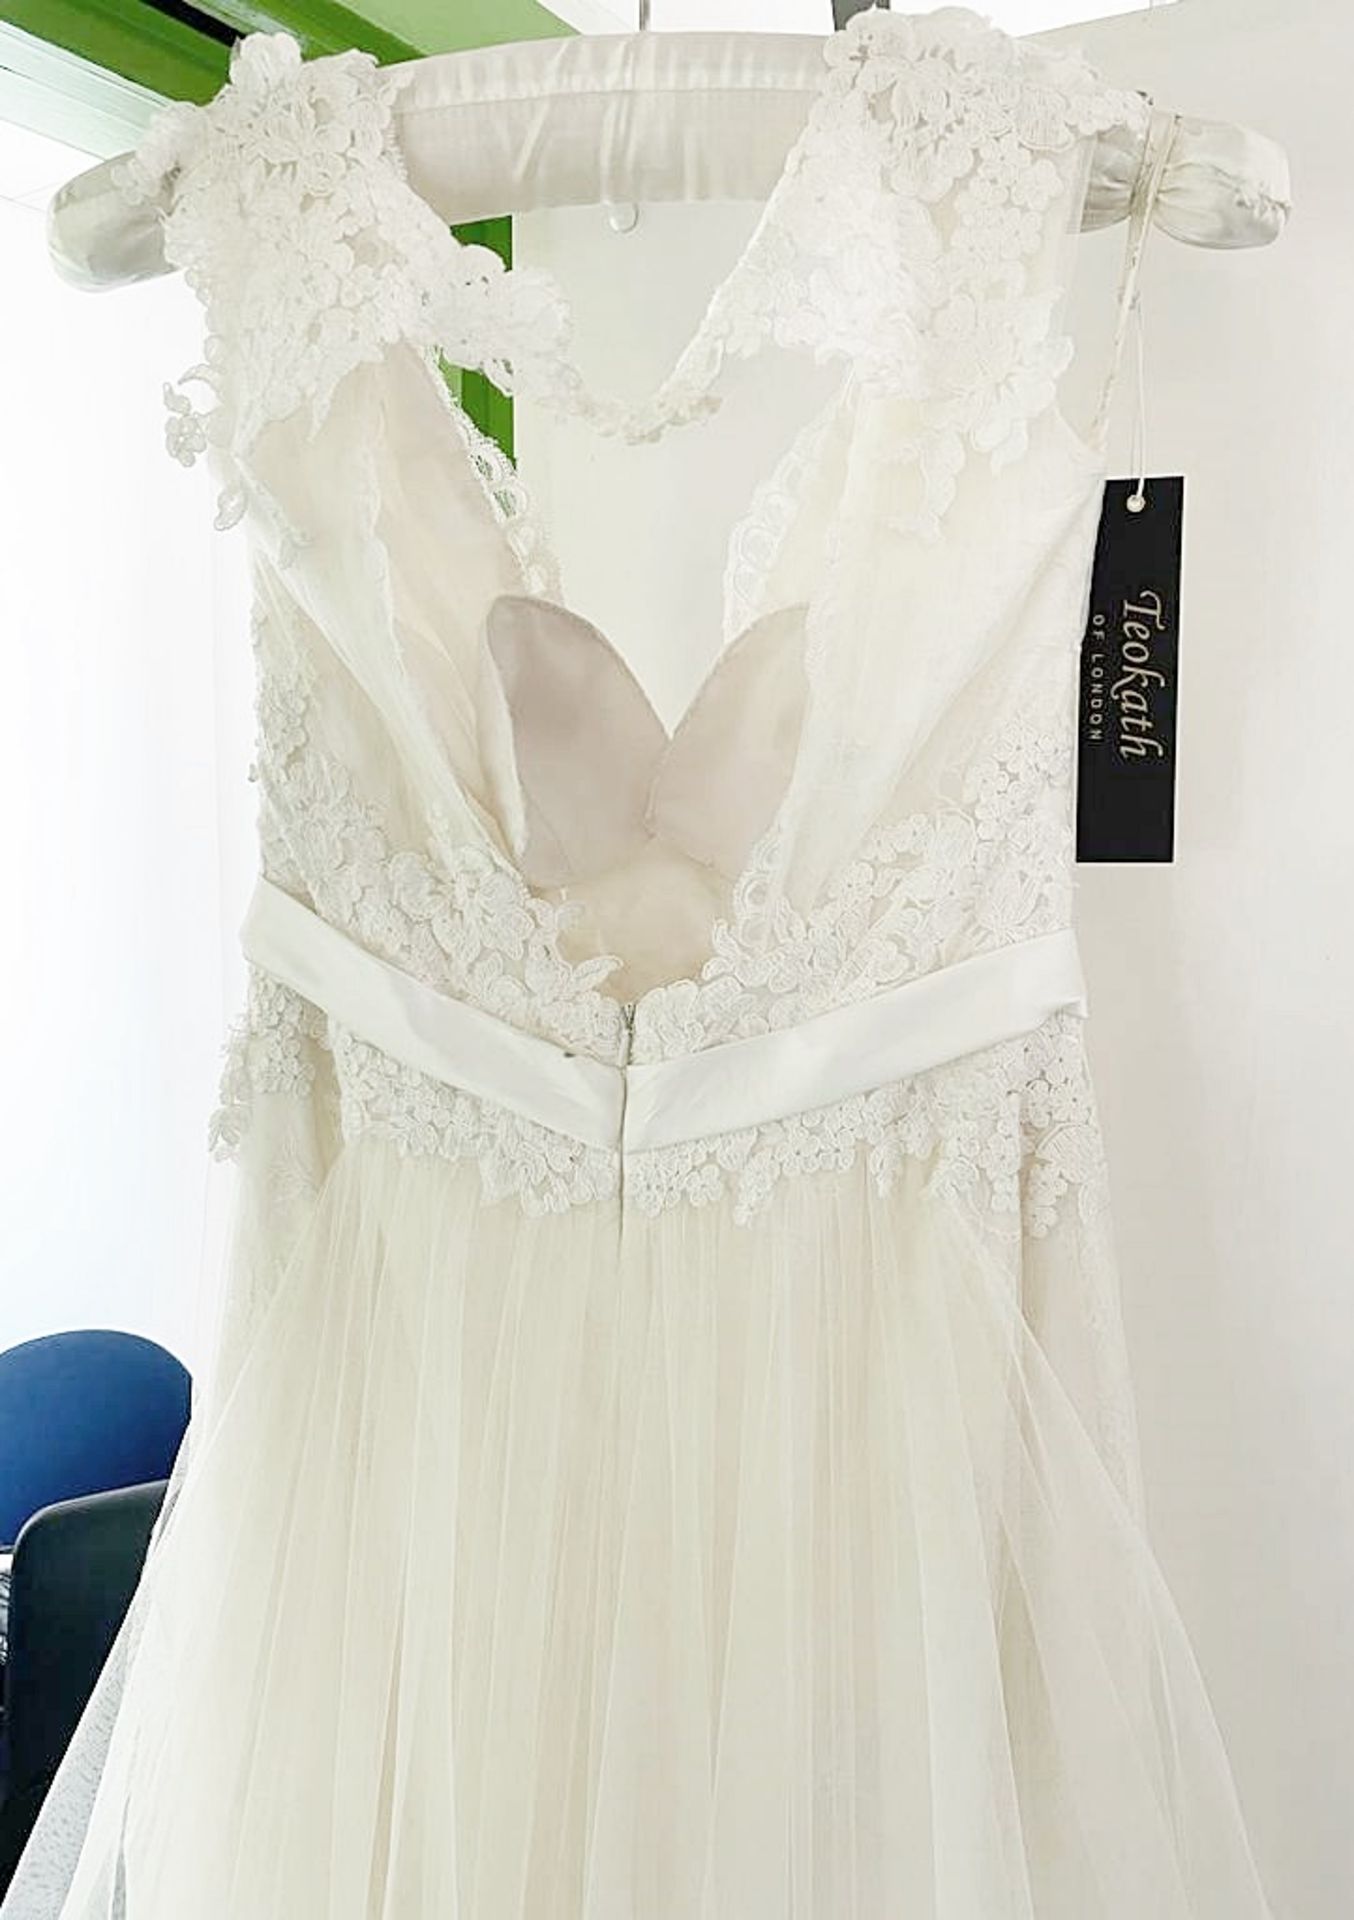 1 x LUSAN MANDONGUS 'Grace' Stunning Designer Wedding Dress Bridal Gown In lace With - Image 5 of 6